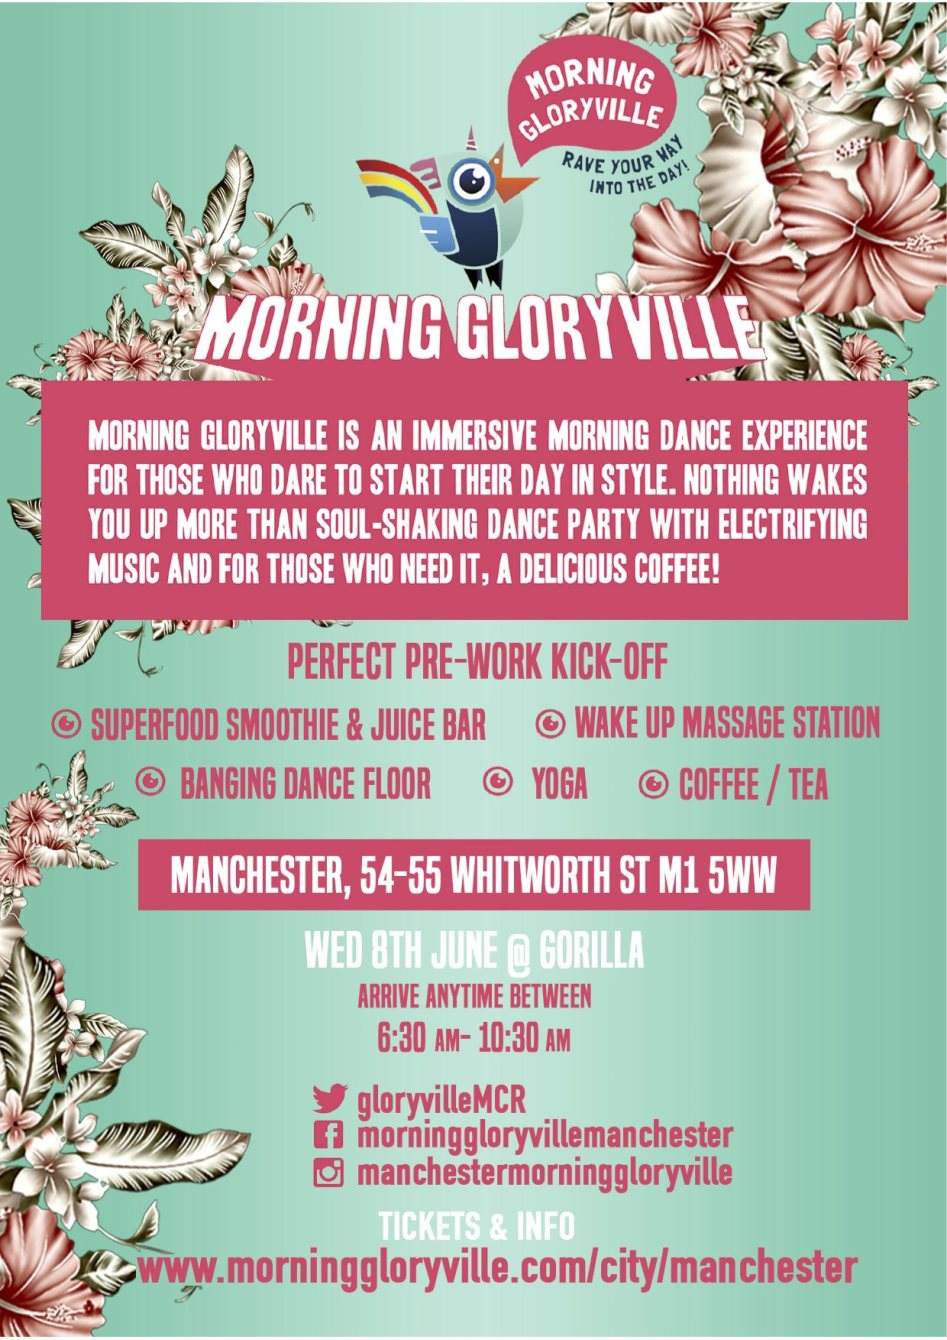 Morning Gloryville Manchester Launch Party - Rave Your Way Into The Day - Página trasera